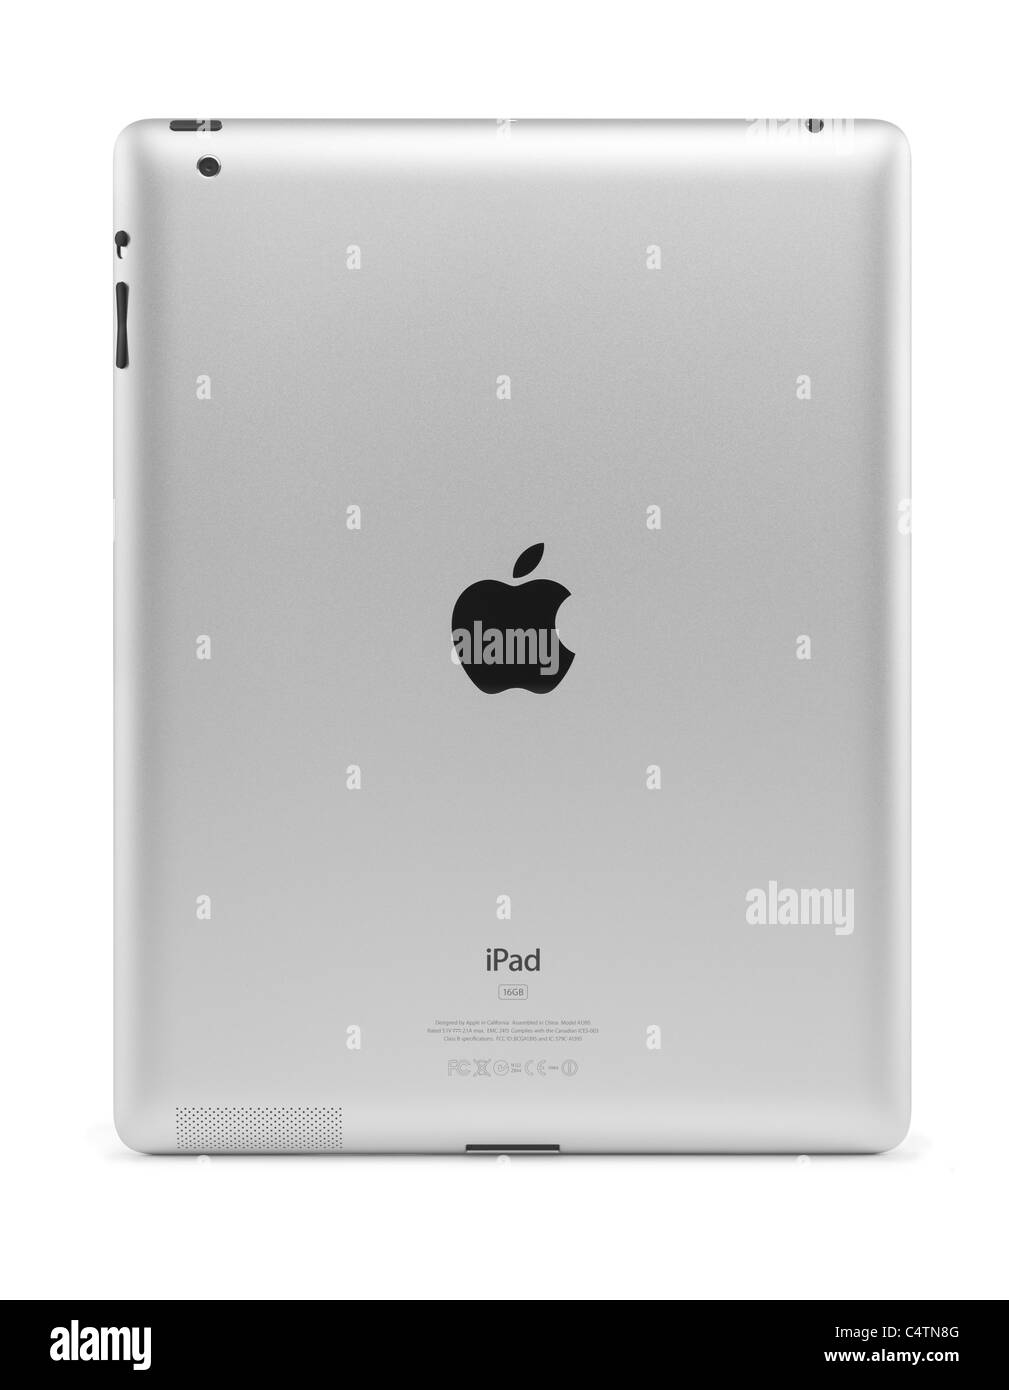 Apple iPad 2 tablet computer rear view. Isolated with clipping path on white background. Stock Photo